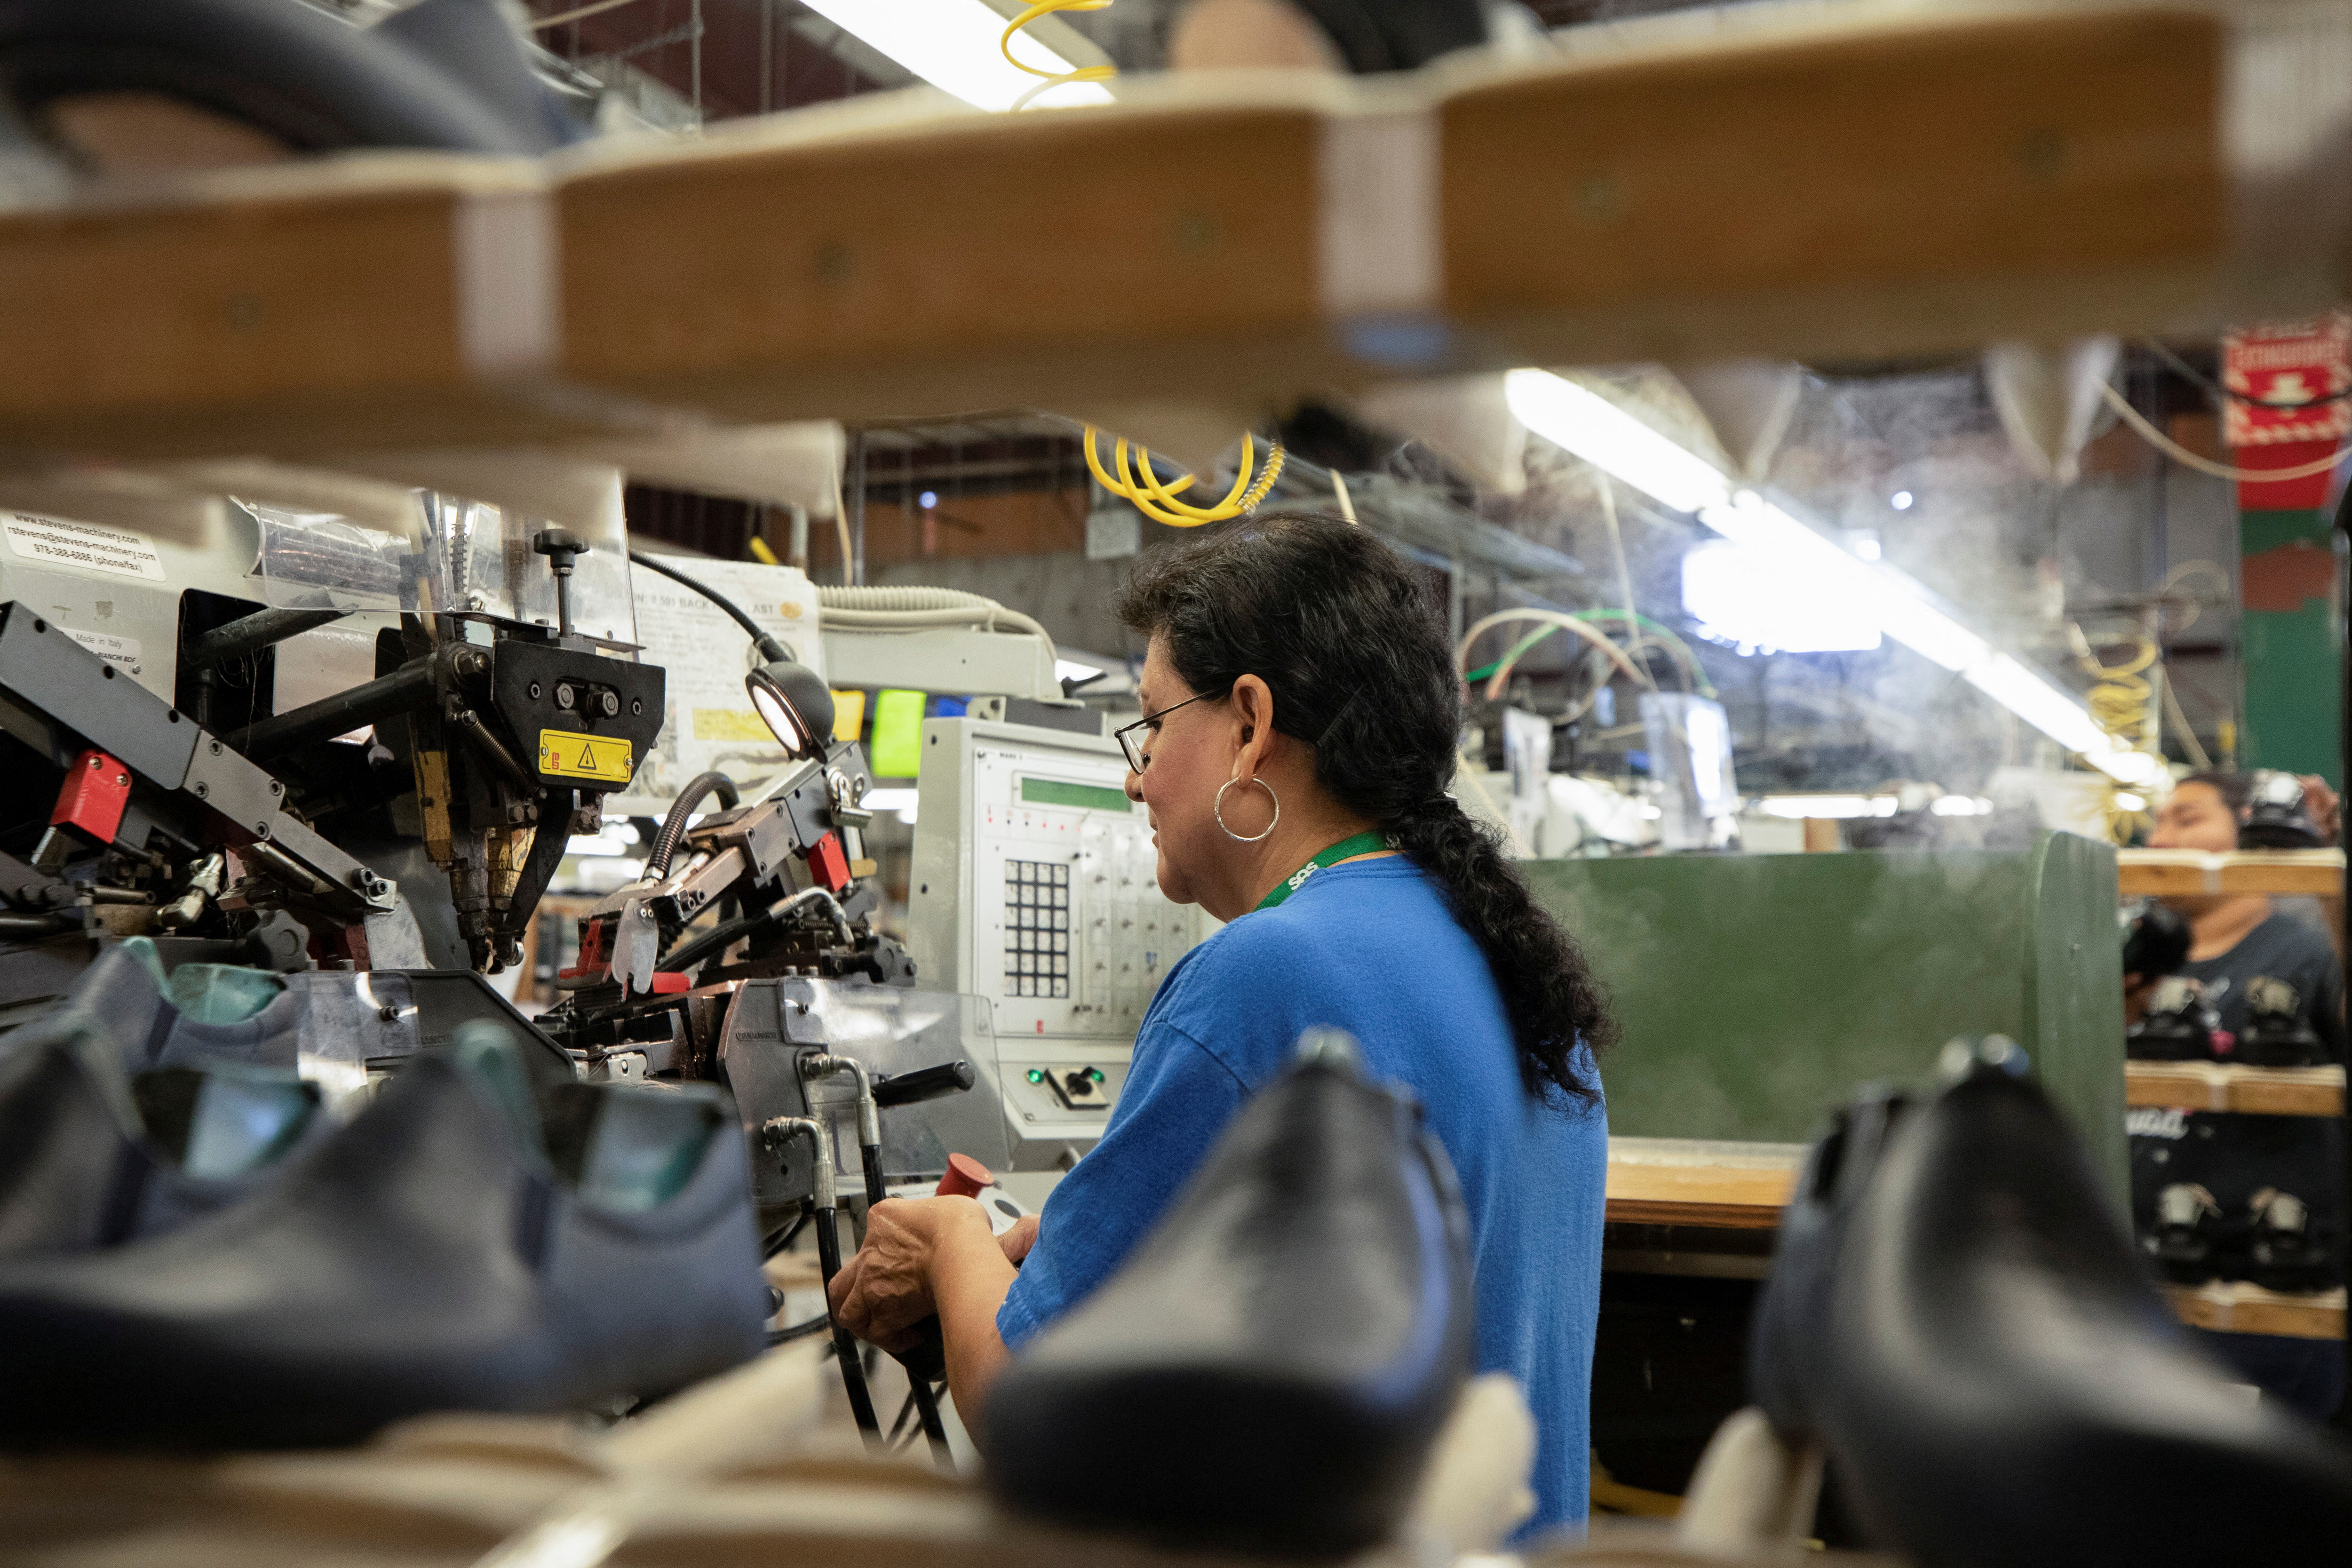 A woman works on the interior mould of a shoe at the San Antonio Shoe Factory in Del Rio